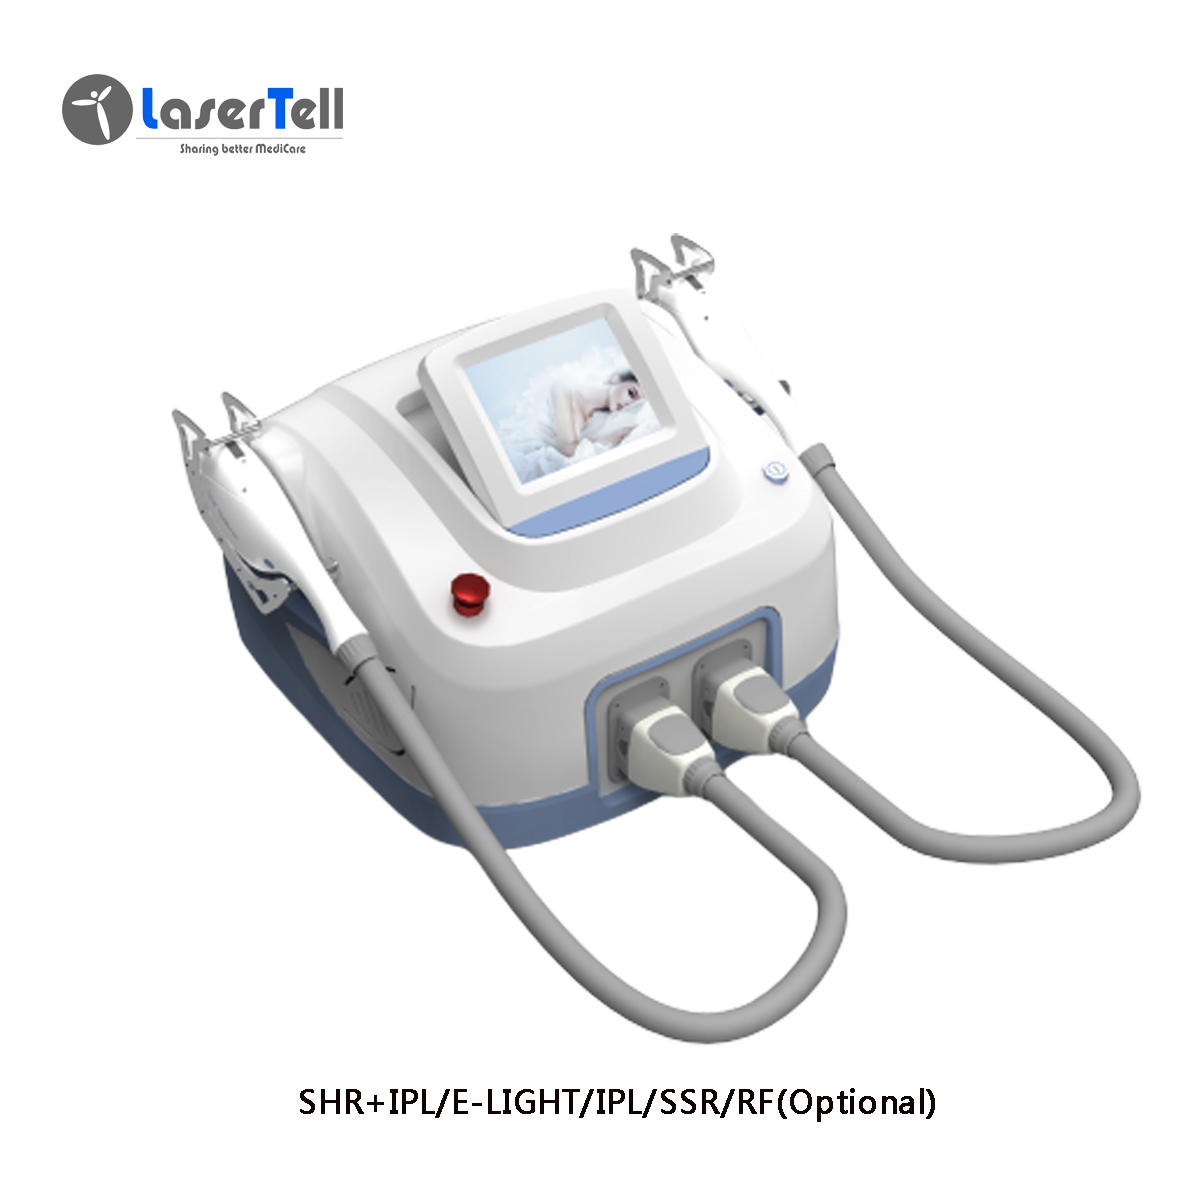 New arrival two handles portable Xenon lamp opt ipl shr laser hair removal machine